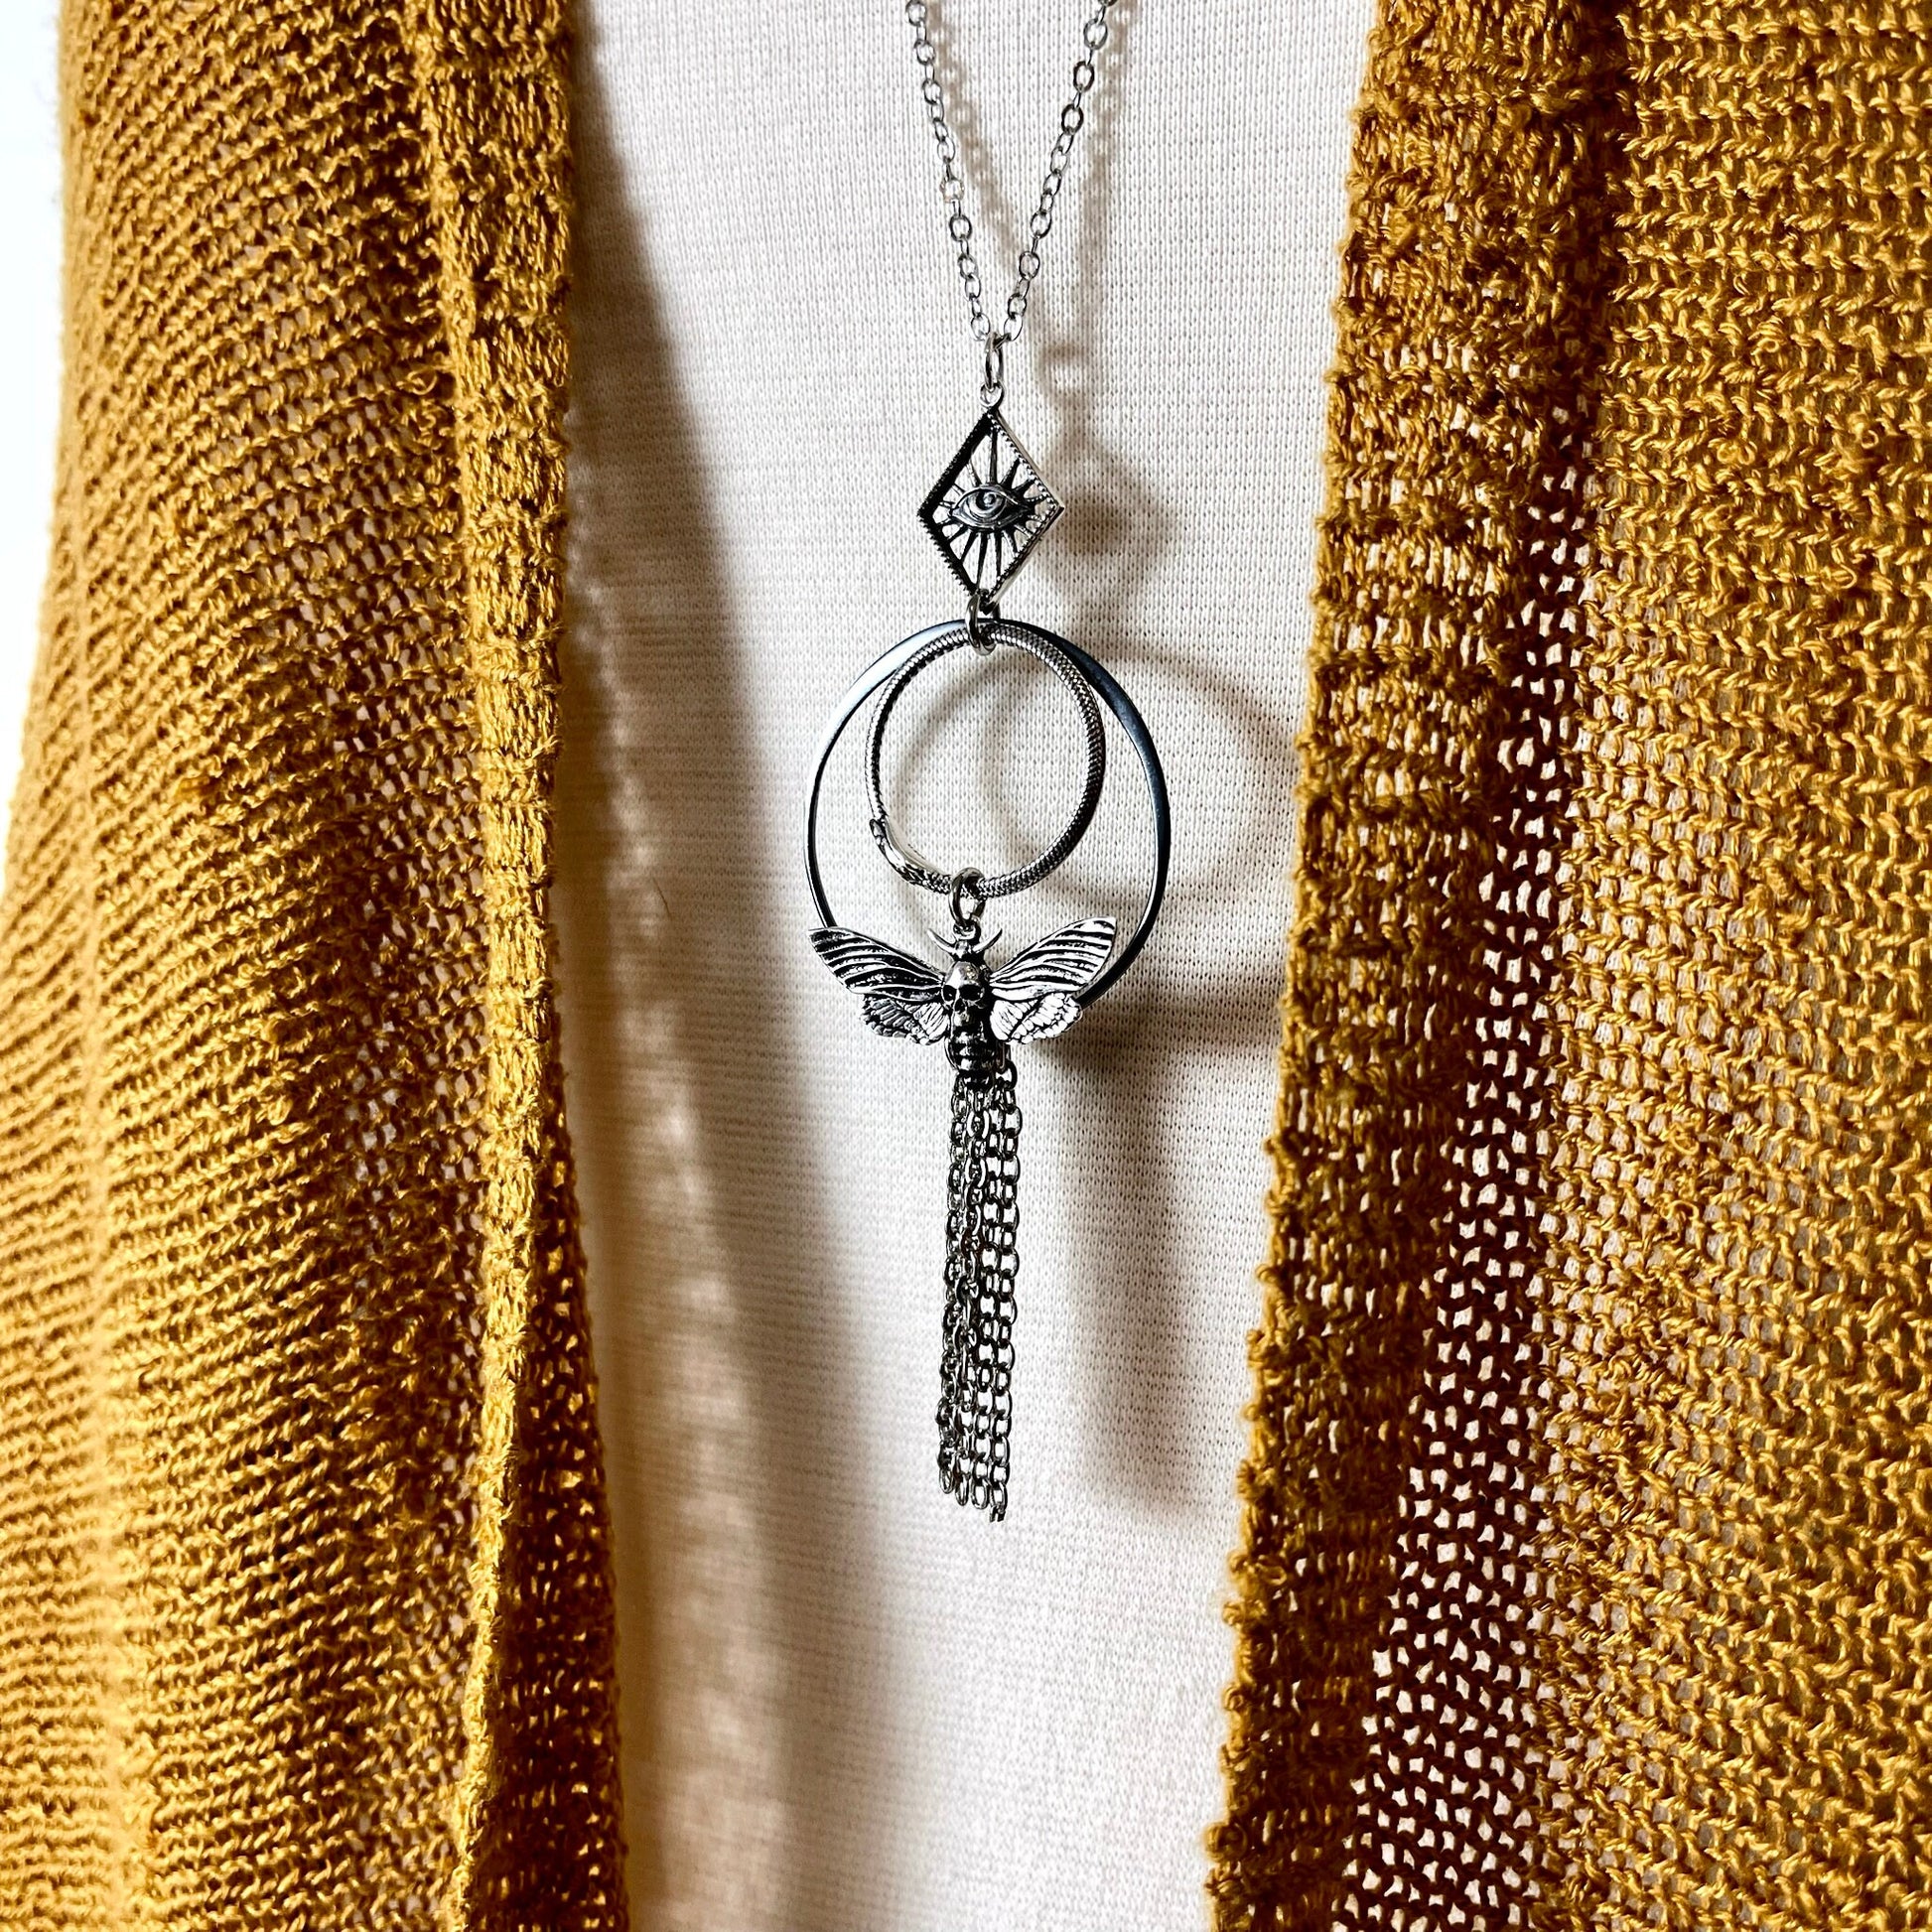 All Seeing Eye, Bohemian Jewelry, Butterfly Jewelry, Death Head Moth, Etsy ID: 1604555572, Fringe Necklace, Gothic Jewelry, Jewelry, Moth jewelry, Moth Necklace, Necklaces, Ouroboros Snake, Pendants, Talisman Necklace, TINY TALISMANS, Witch Jewelry, Witch